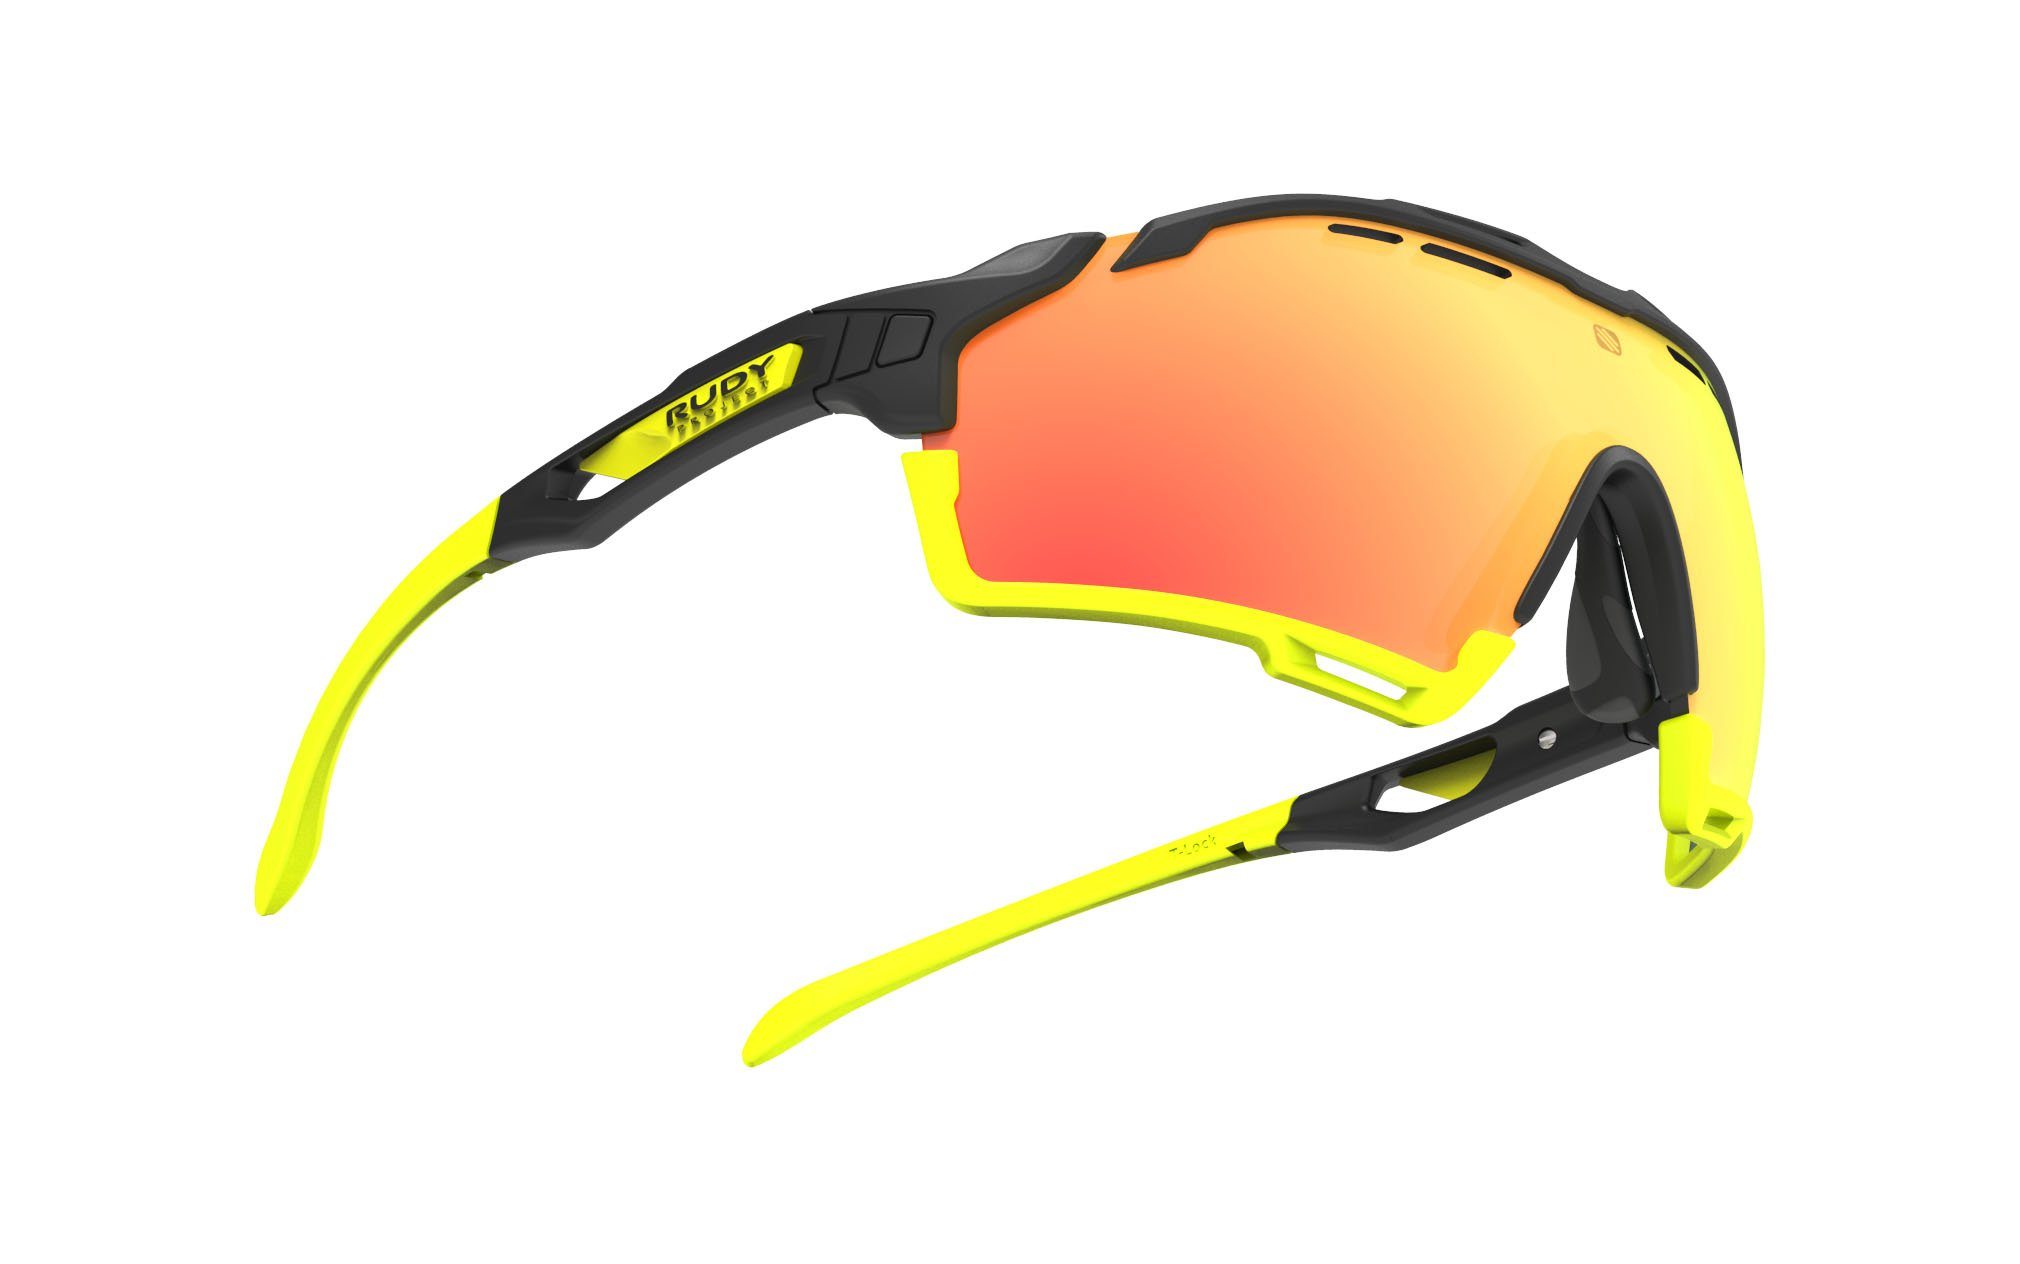 Rudy Project Cutline sunglasses review